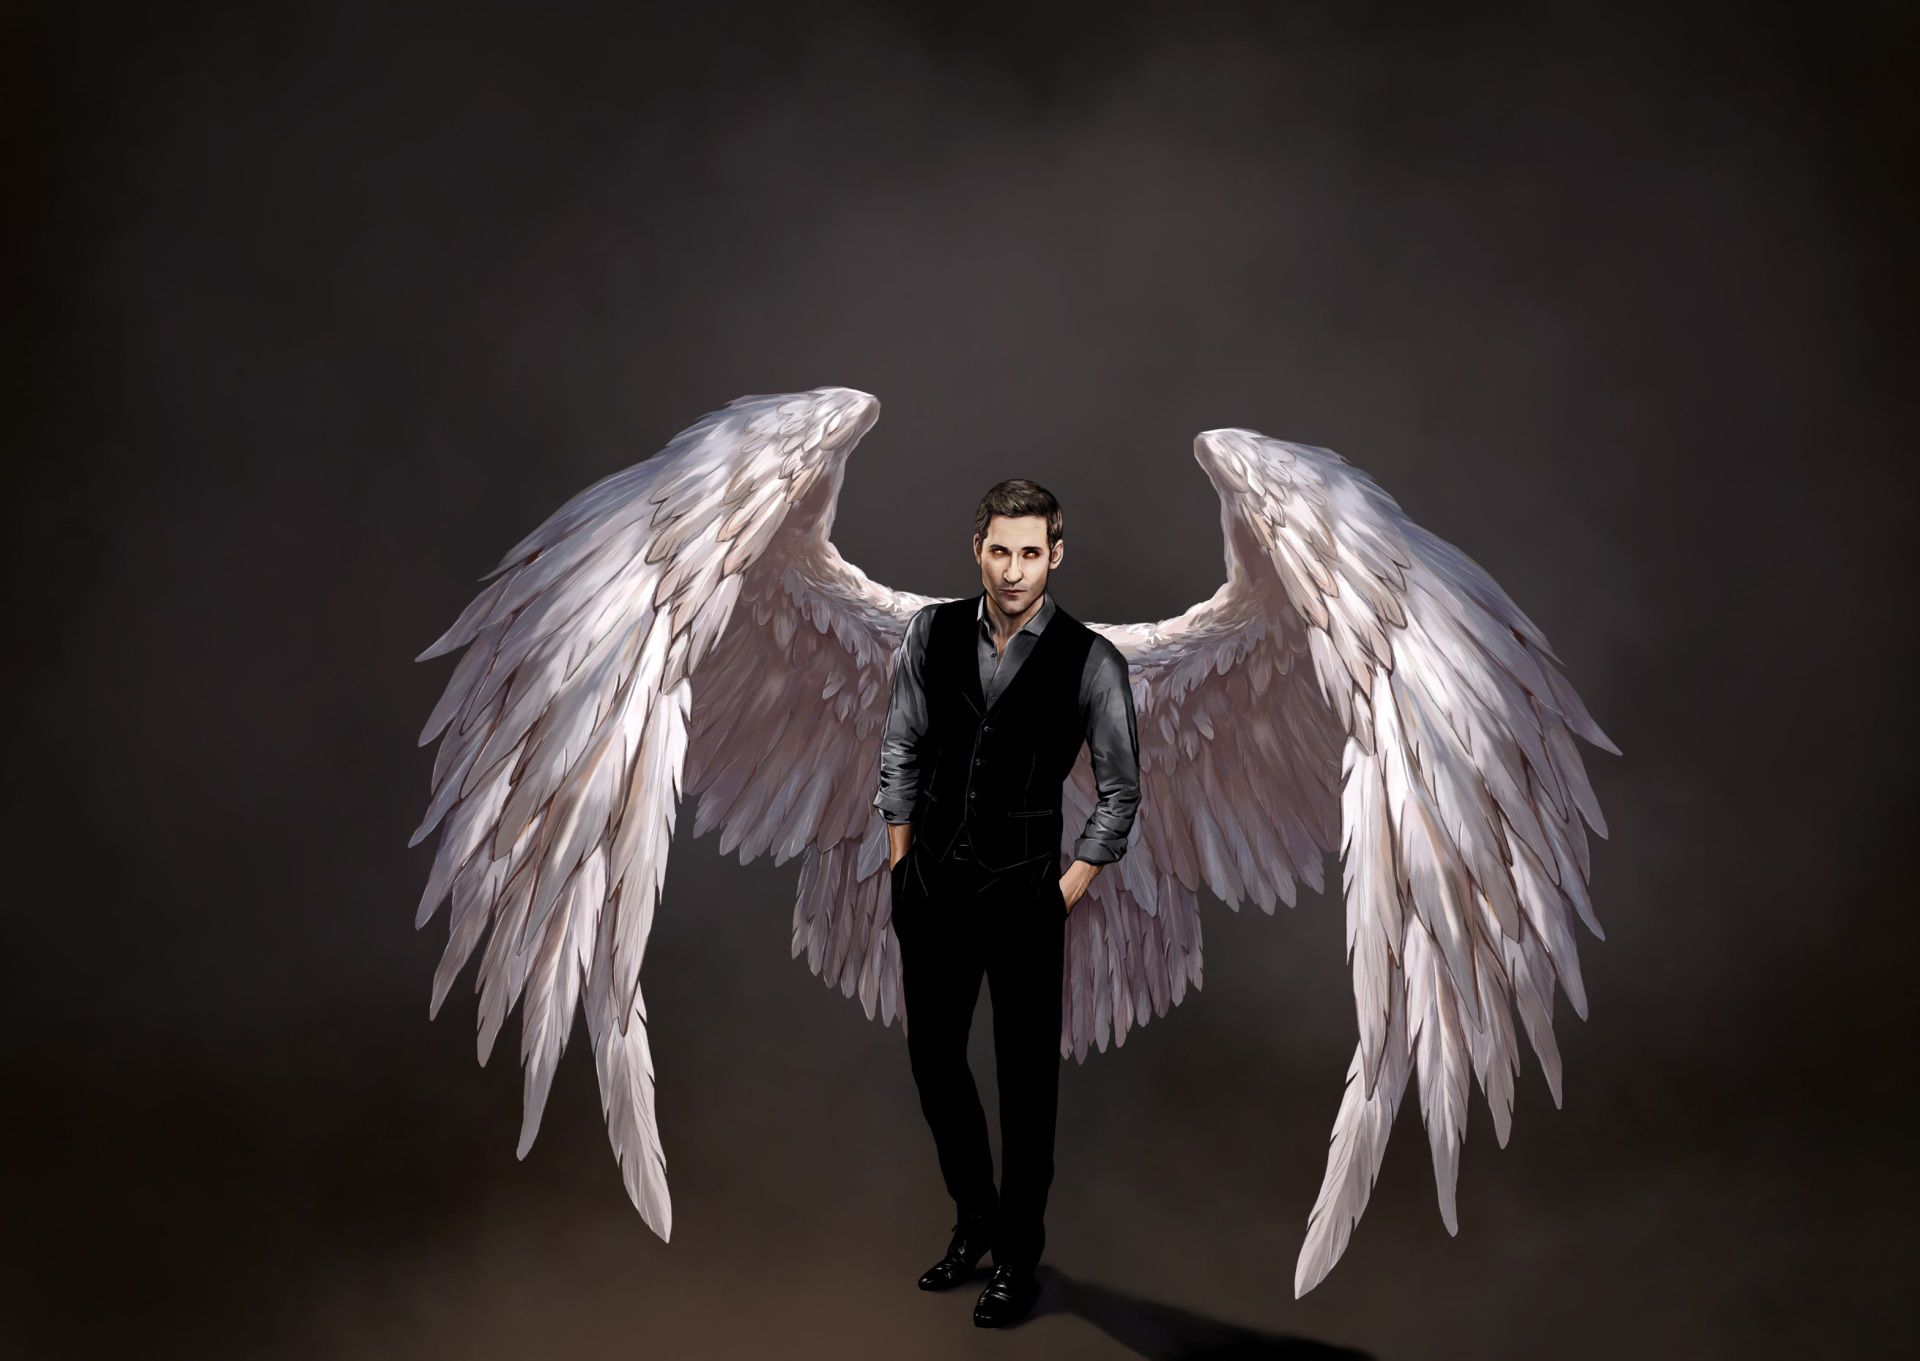 lucifer wallpaper download free for pc HD. Lucifer morningstar, Lucifer, Lucifer wings